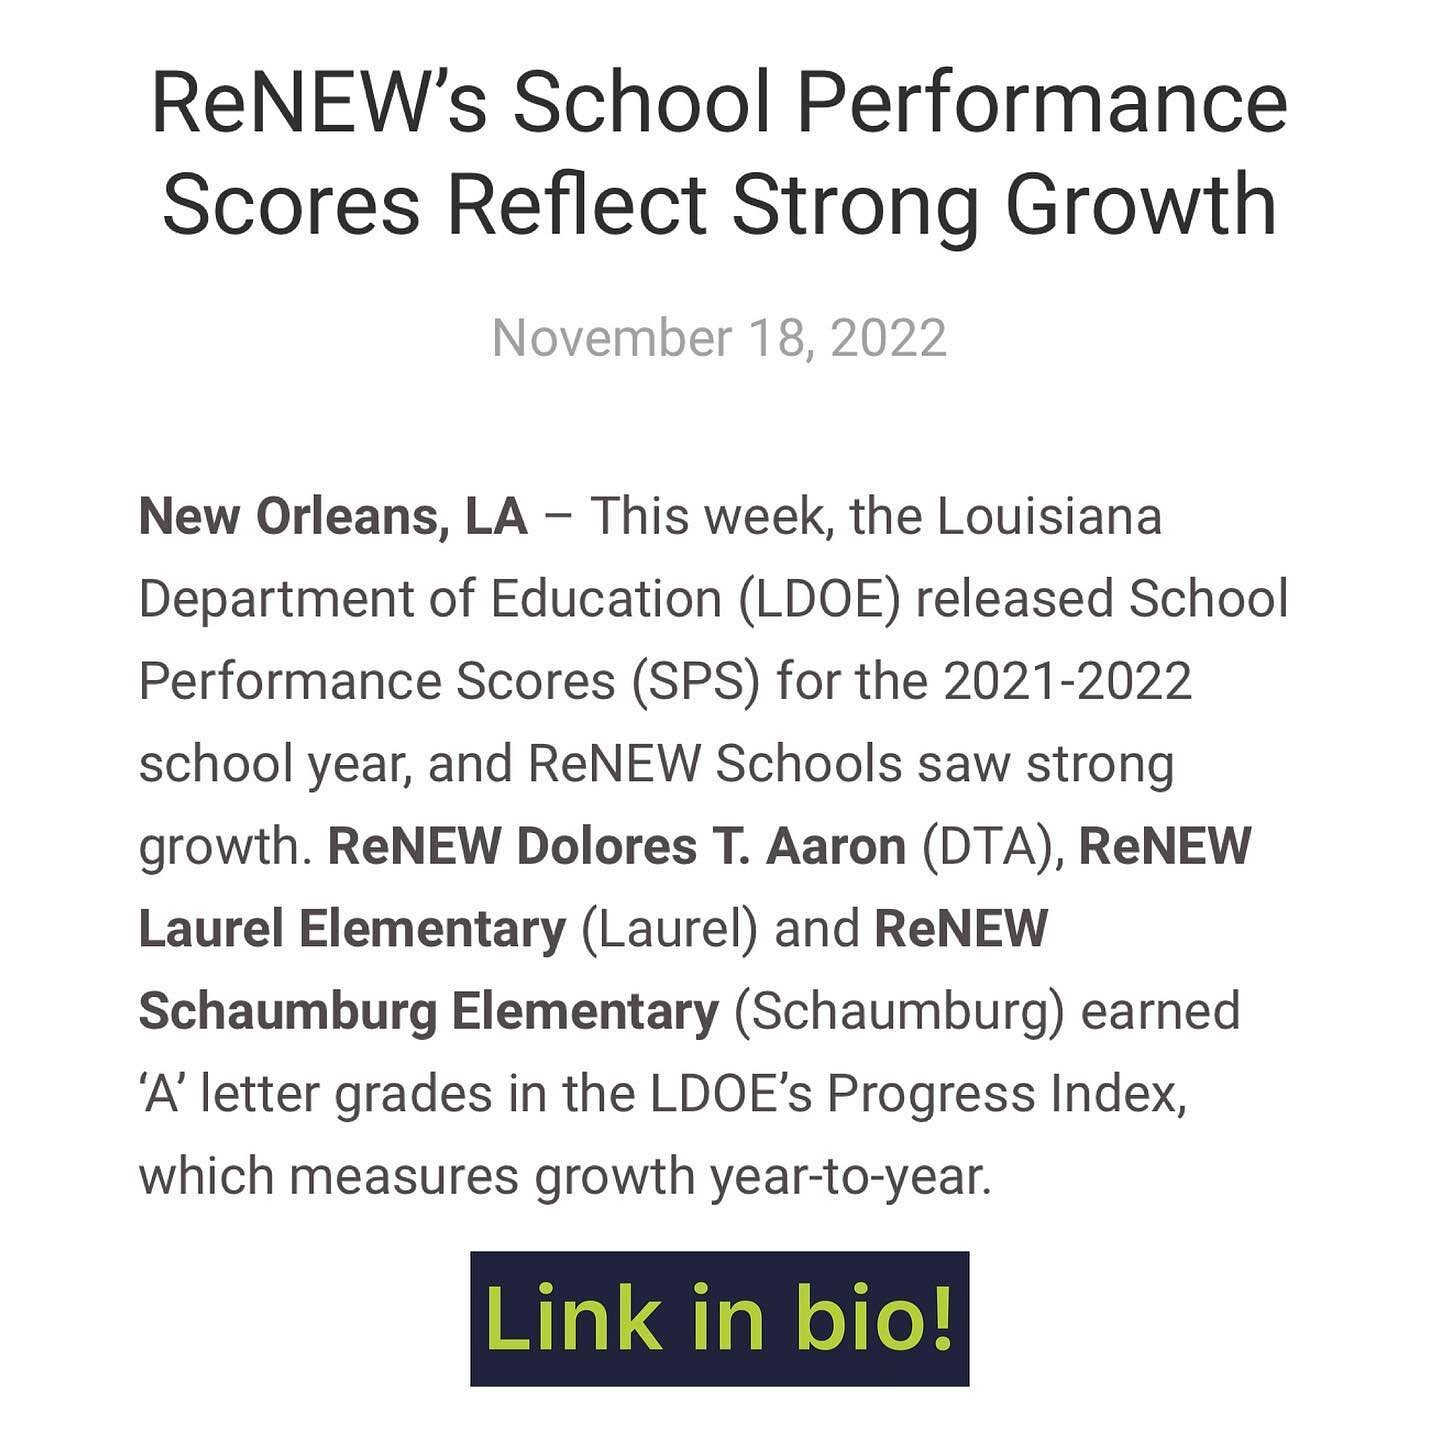 The Louisiana Department of Education (LDOE) released School Performance Scores (SPS) for the 2021-2022 school year, and ReNEW Schools saw strong growth. ReNEW Dolores T. Aaron (DTA), ReNEW Laurel Elementary (Laurel) and ReNEW Schaumburg Elementary (